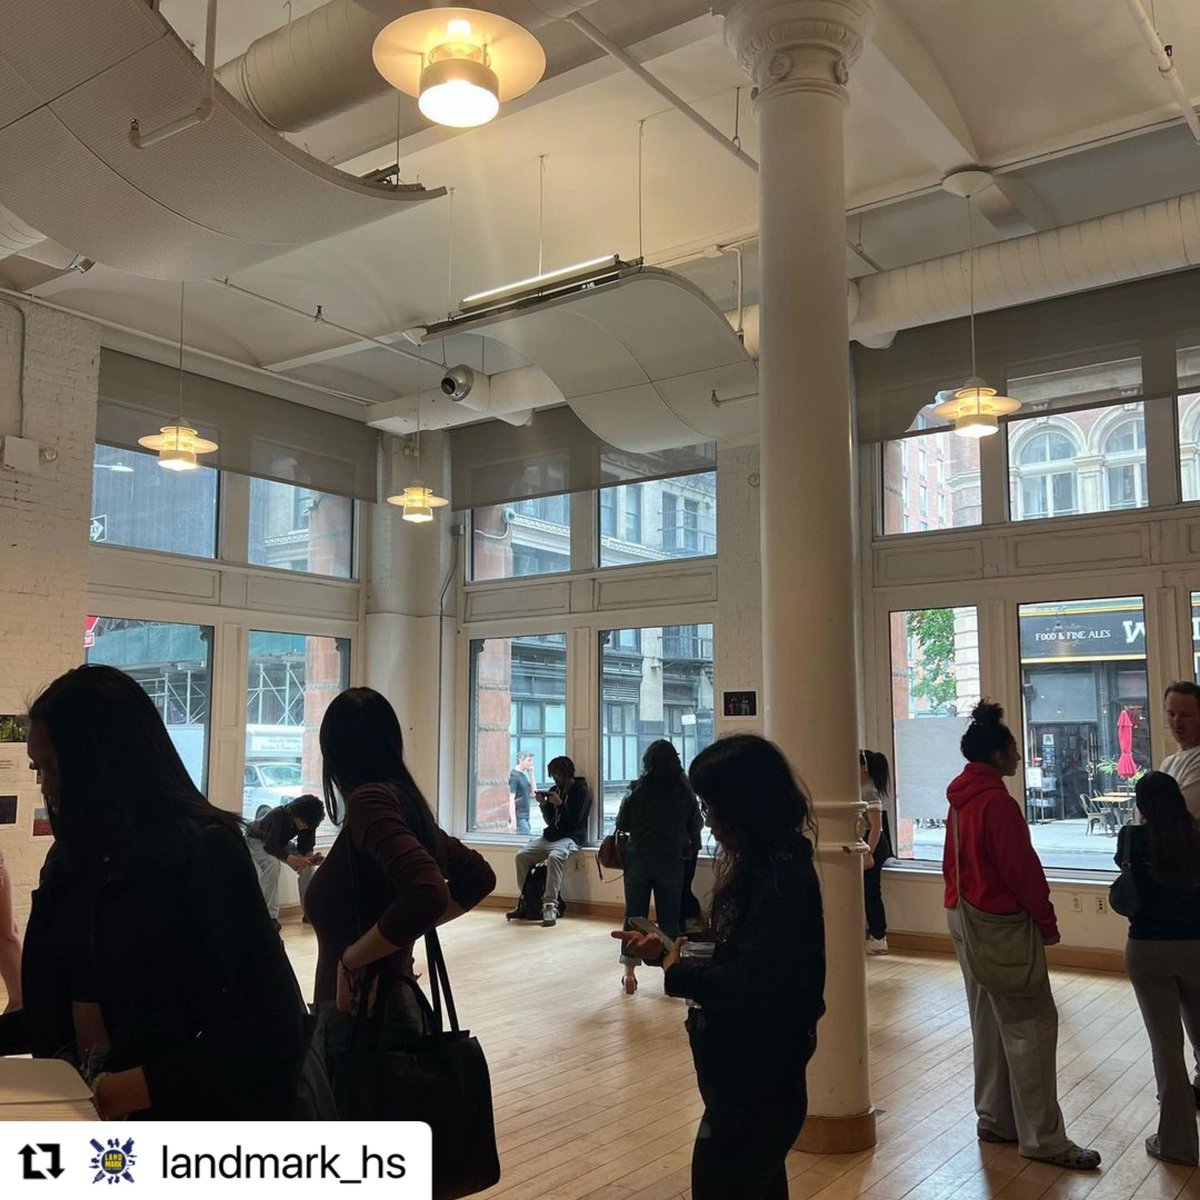 A round of applause for the #LandmarkHS artists for putting together an outstanding photography show! Here's to more artistic expressions and beauty captured in frames next year. 📸 #BeautyInArt @NYU #SelfExpression #LandmarkHS @nycoasp @NYCSchools #photograghy #Art #Artist